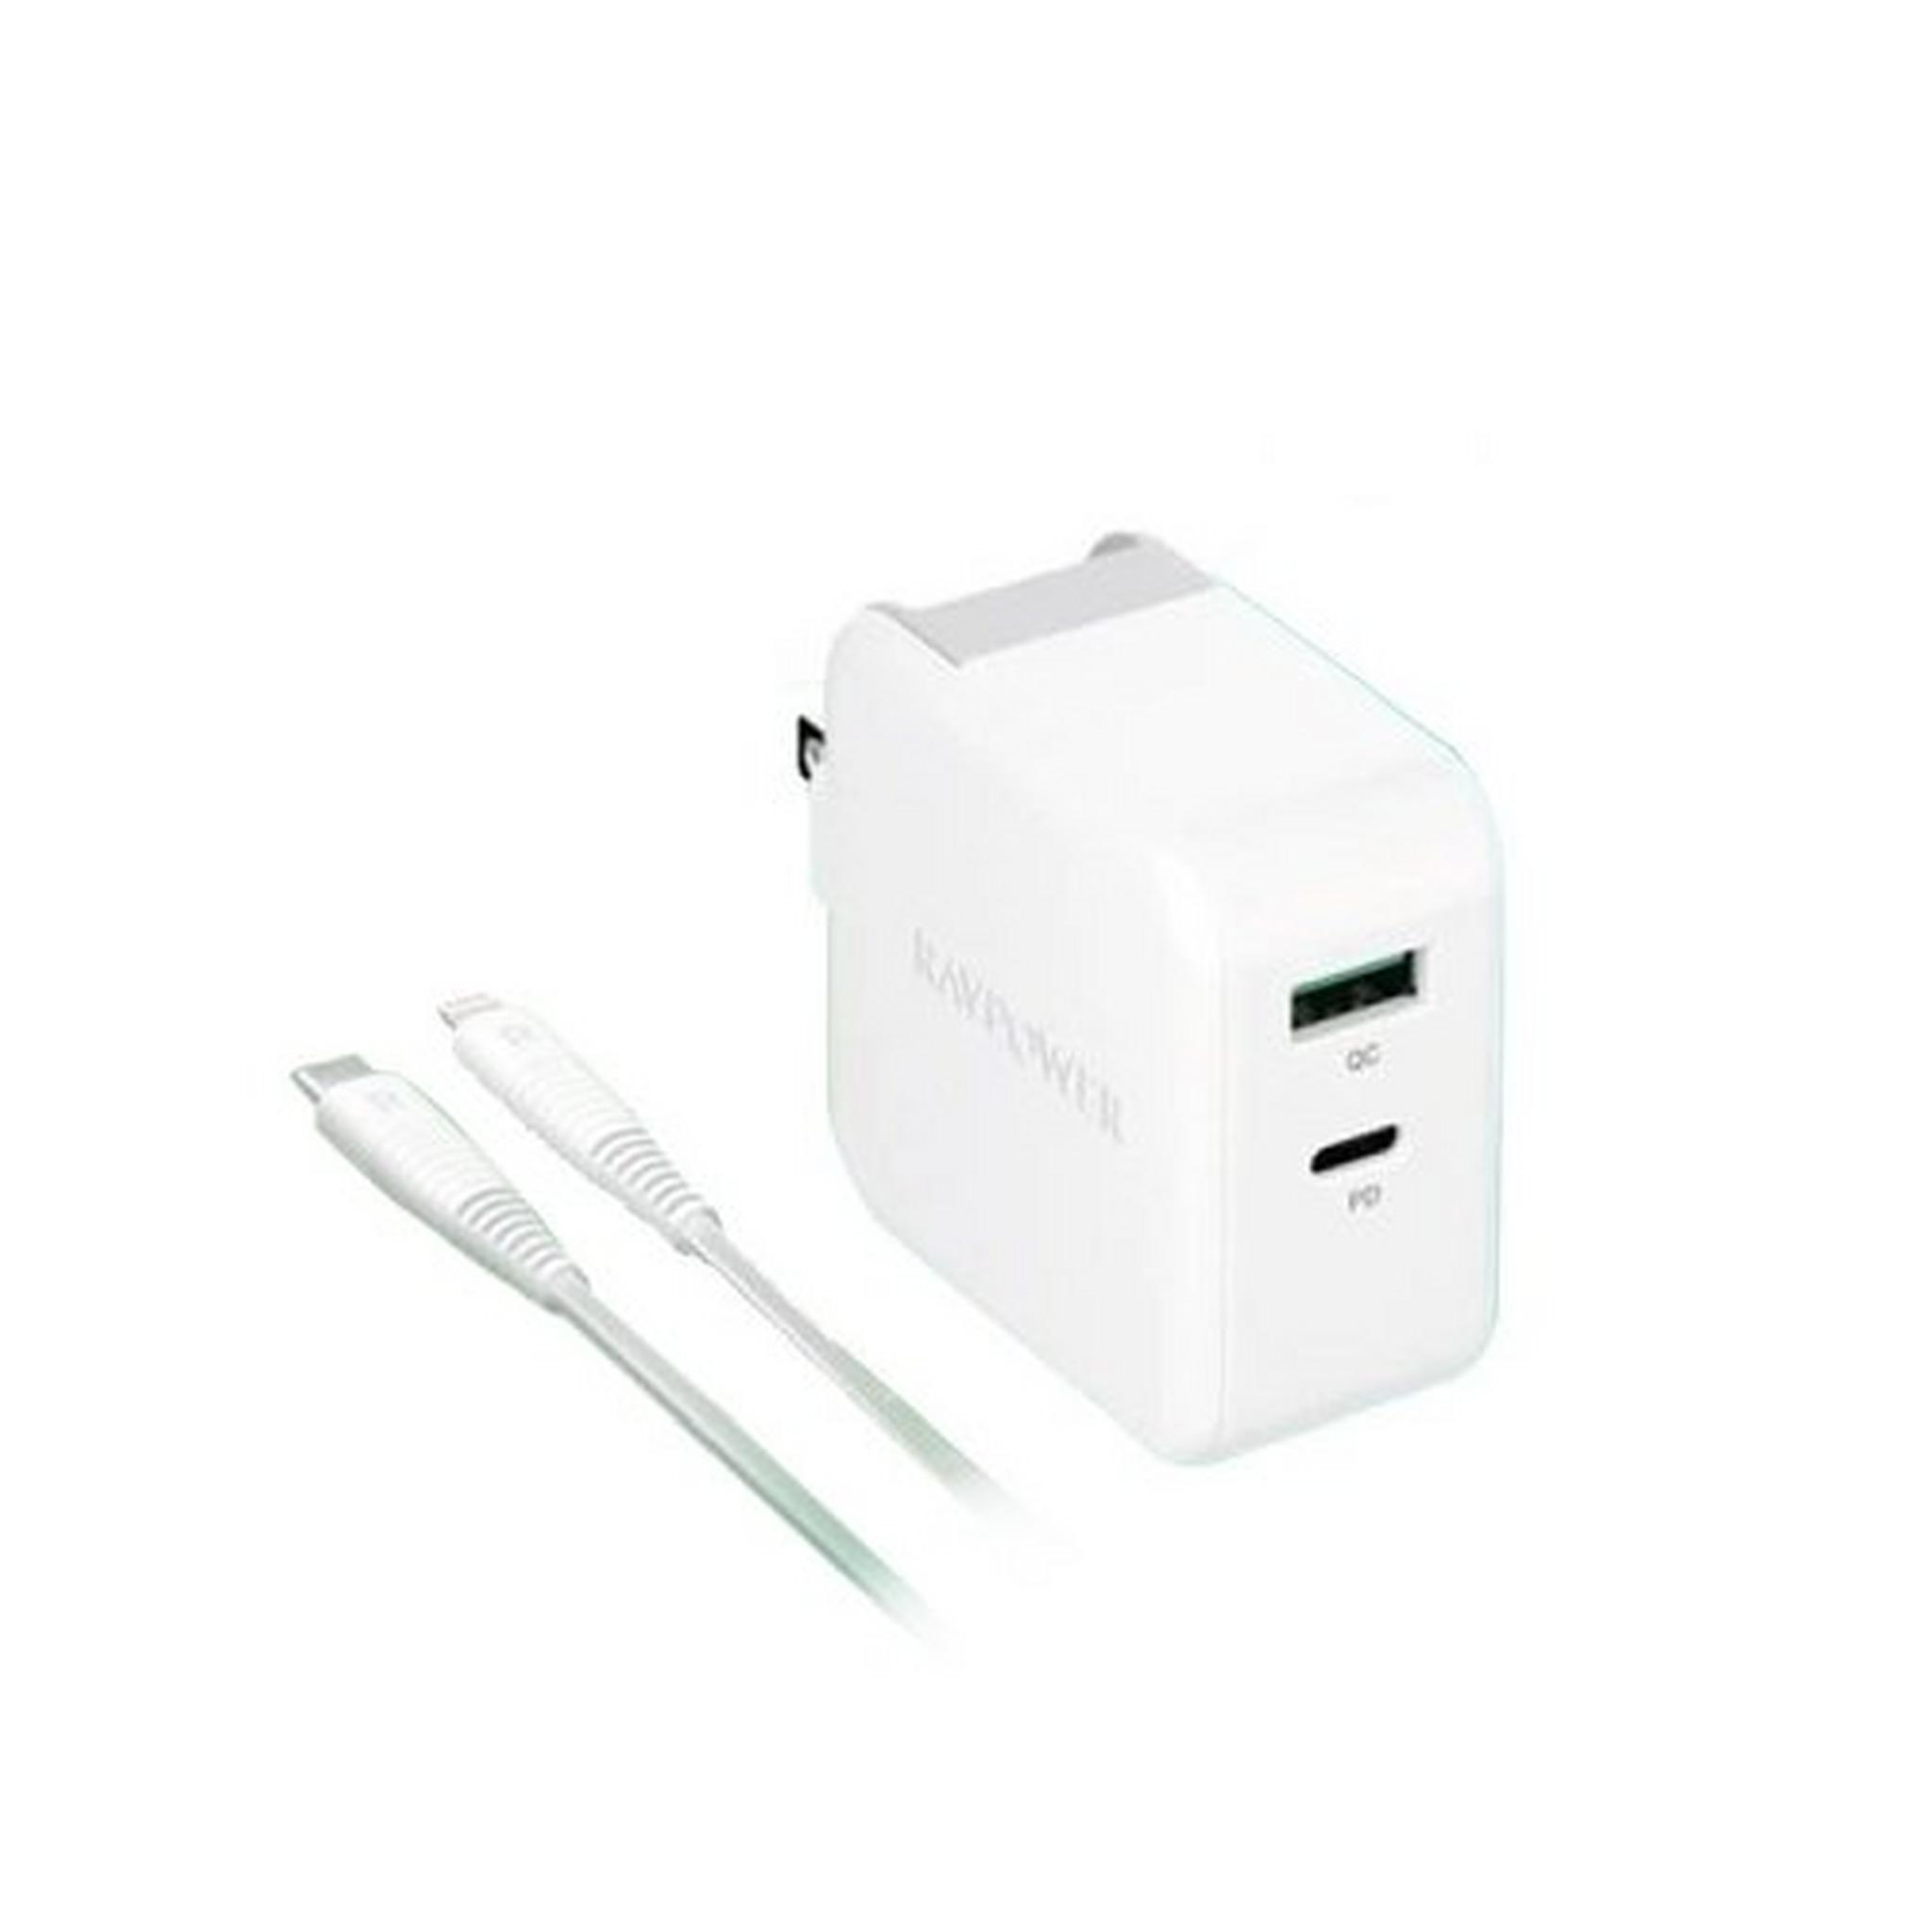 RAVPower 36W UK Wall Charger + Lighting Cable (RP-PC129) - White